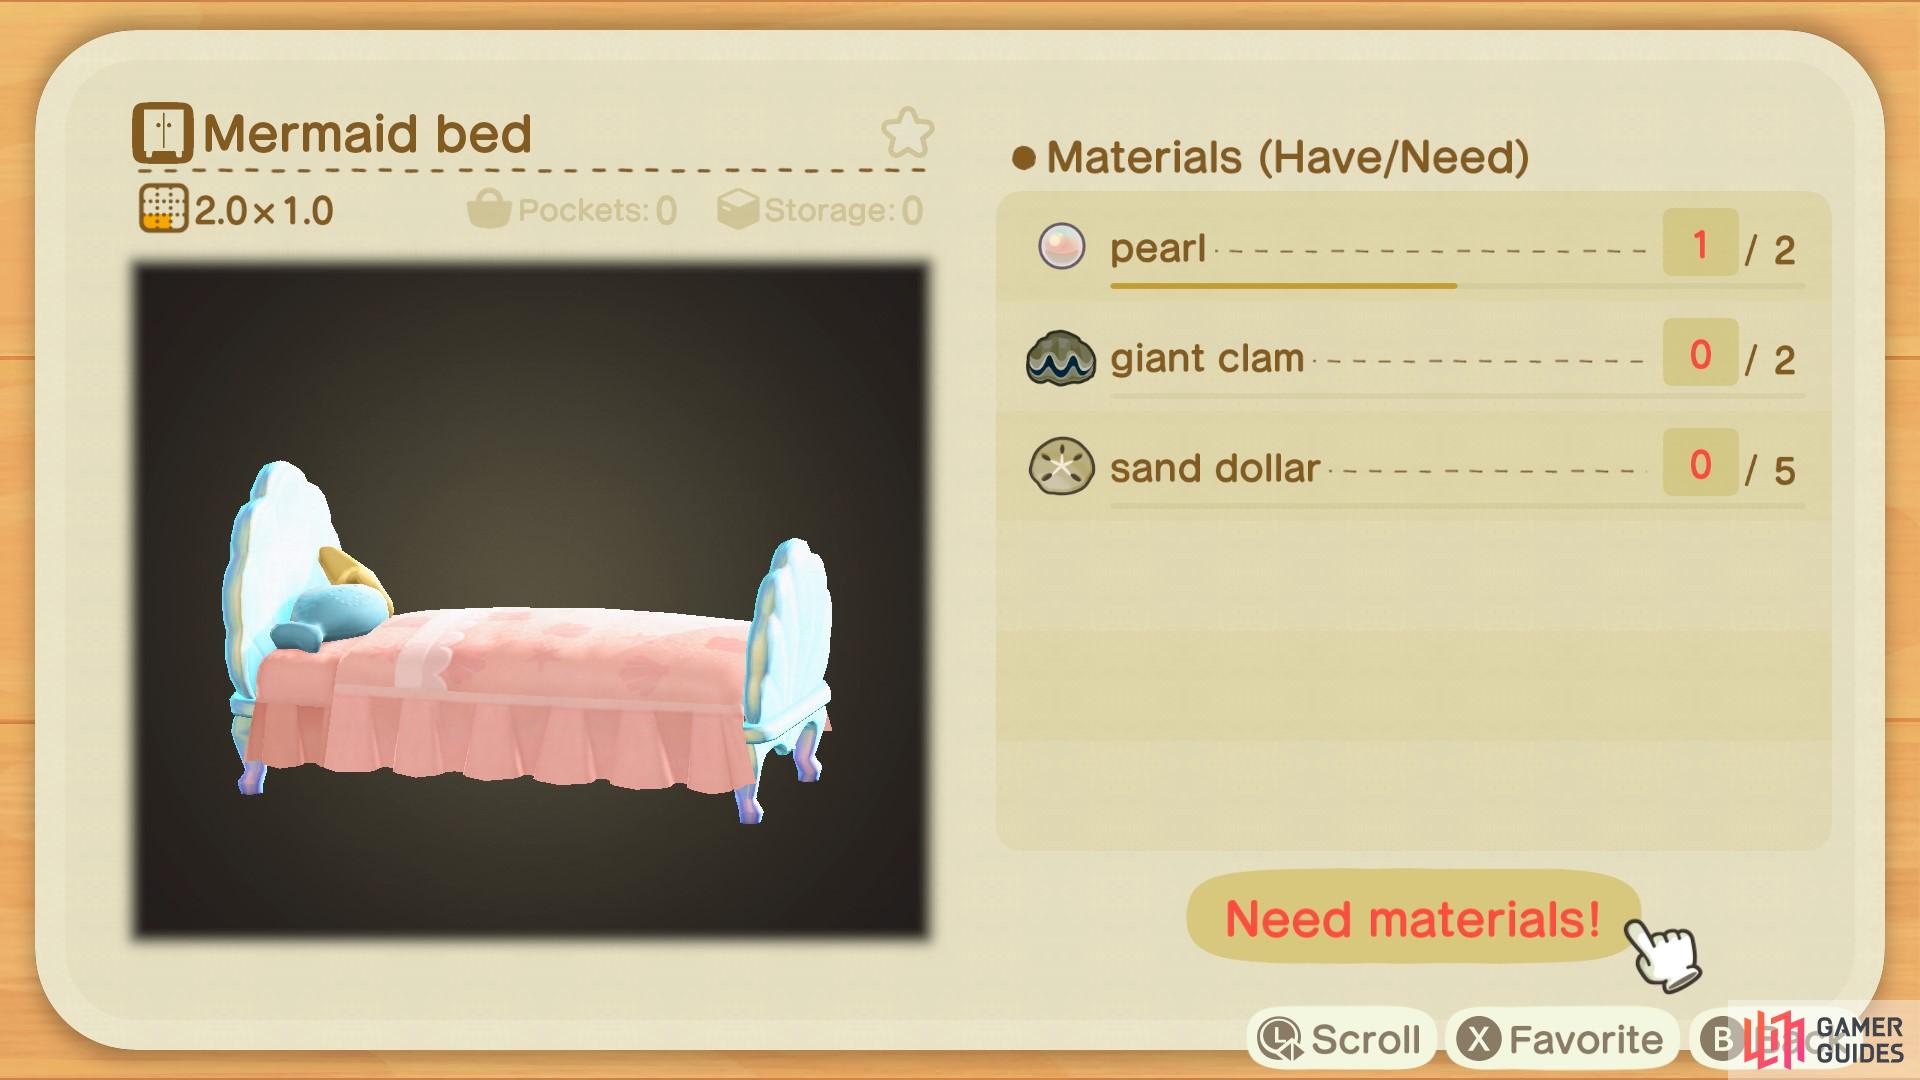 The mermaid set is a popular themed set amongst Animal Crossing players.